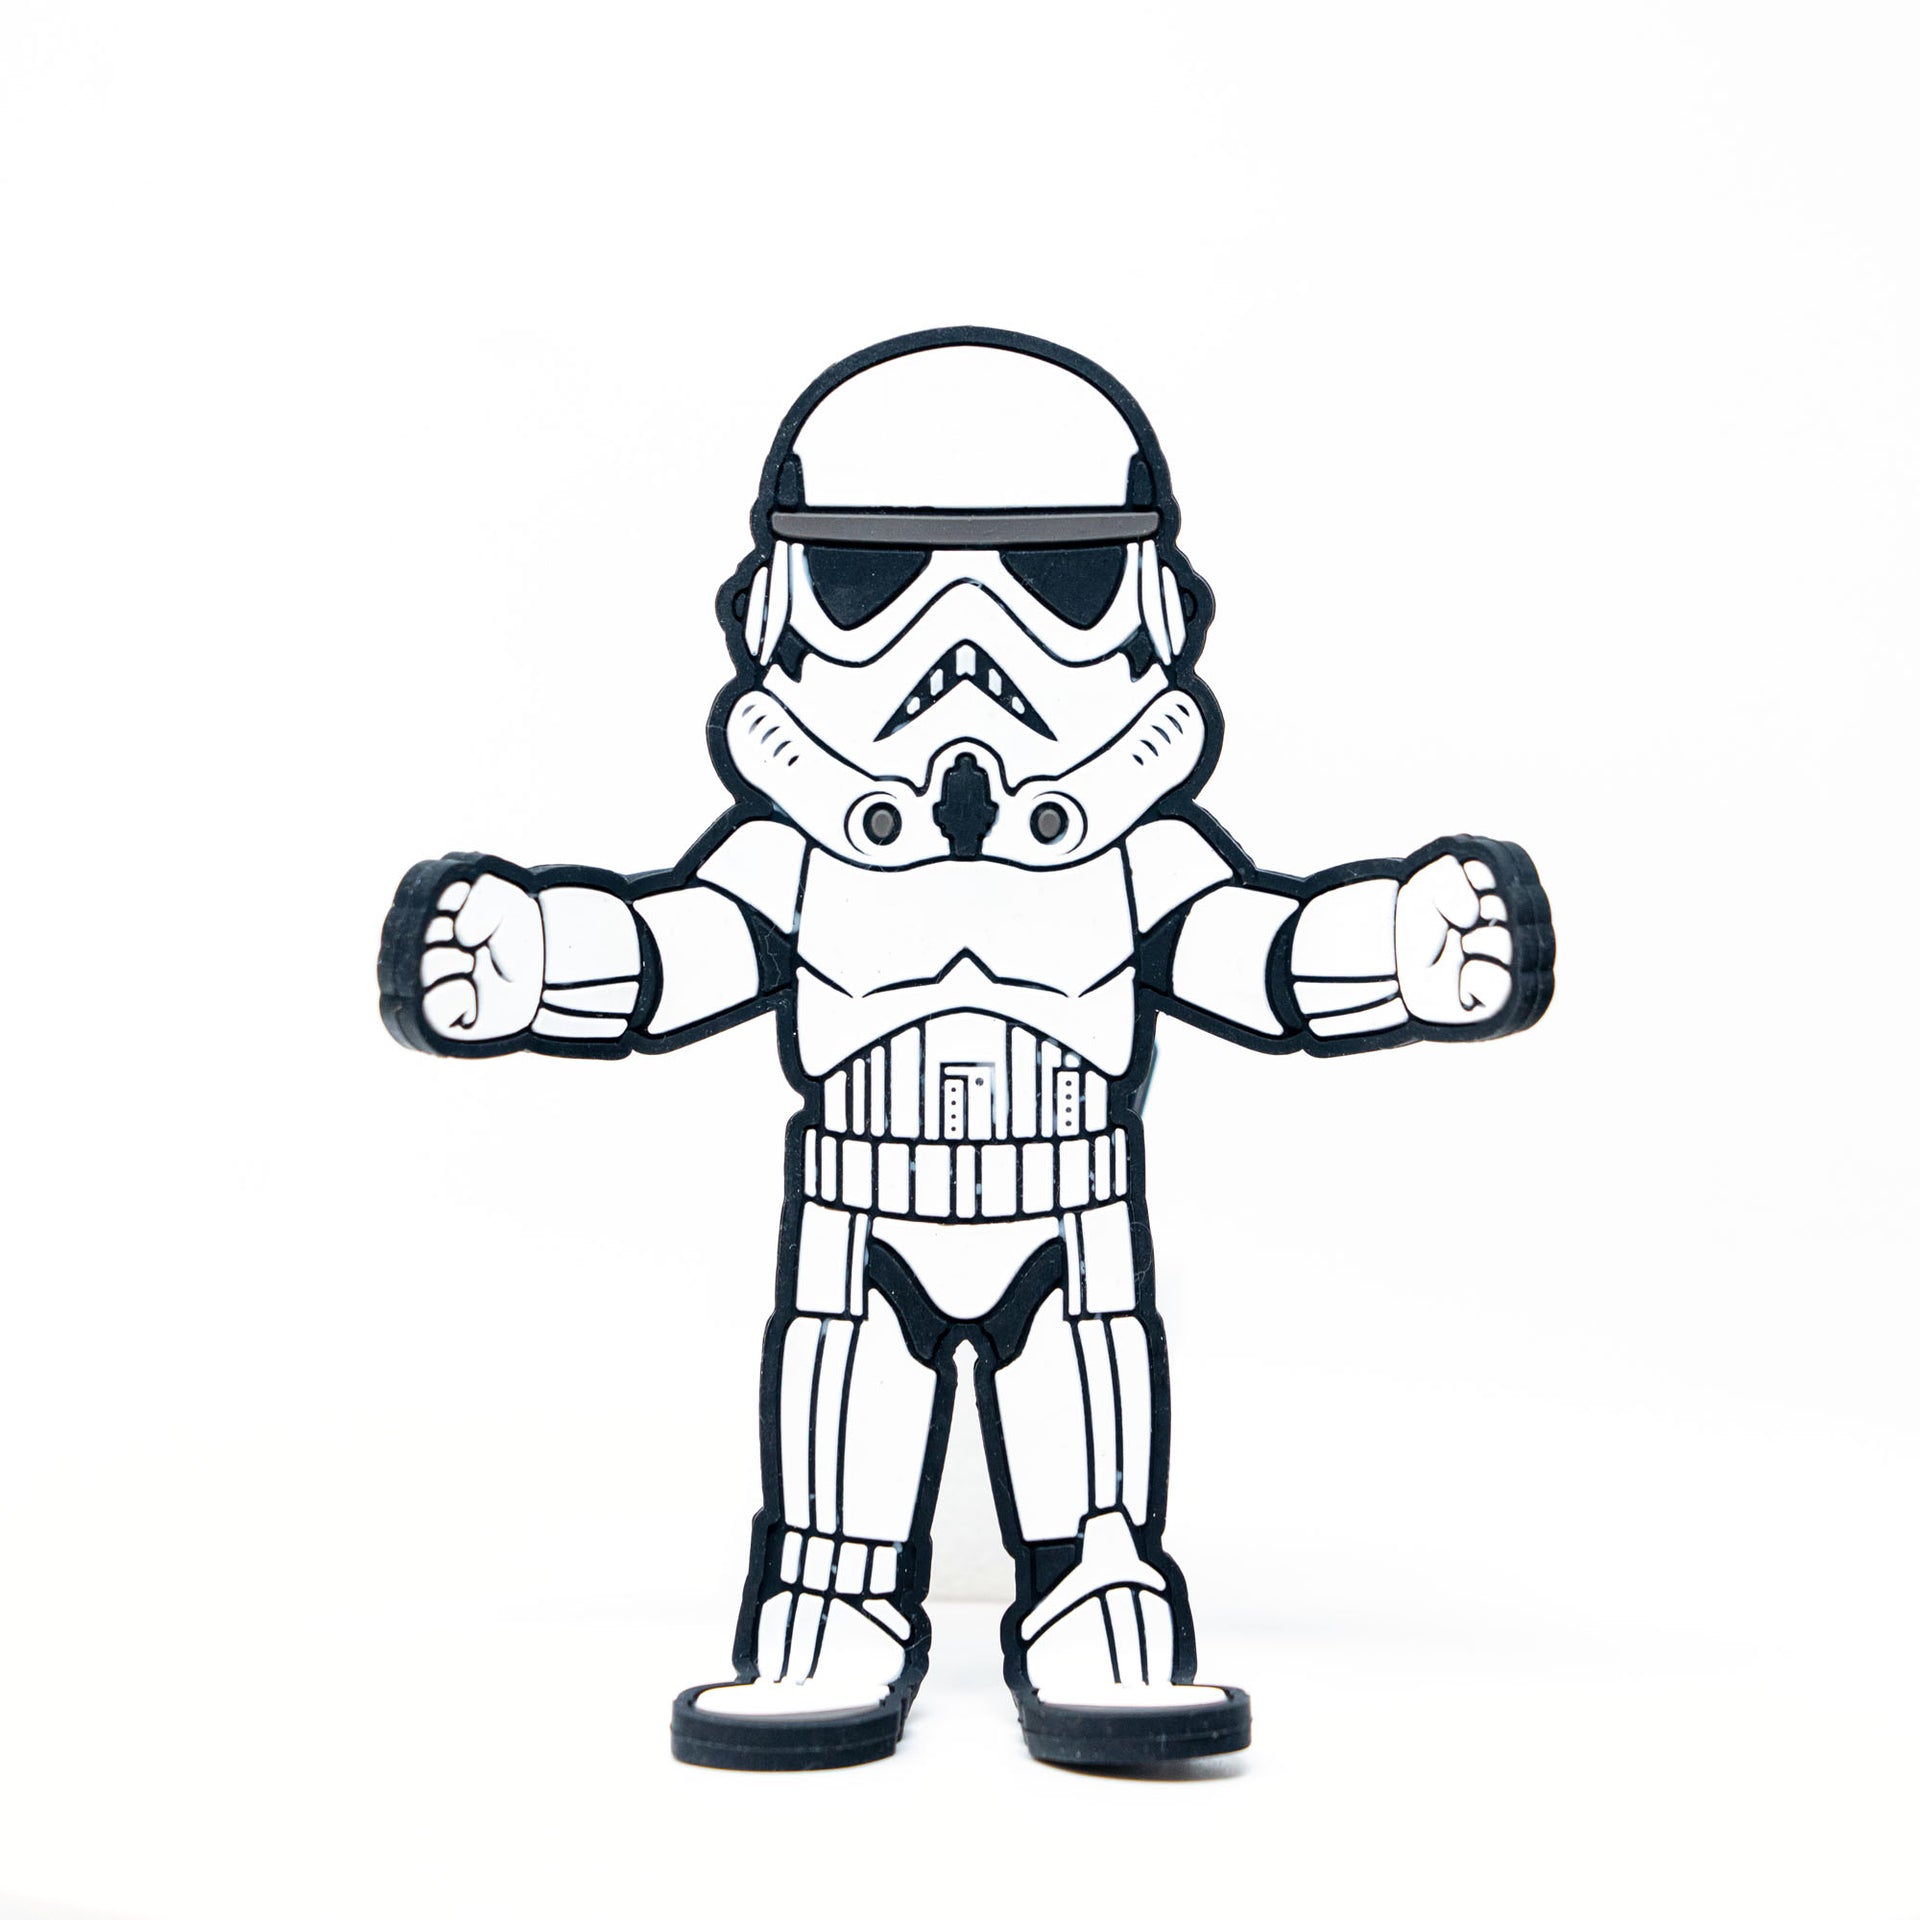 Image of Star Wars Stormtrooper Hug Buddy on a white background